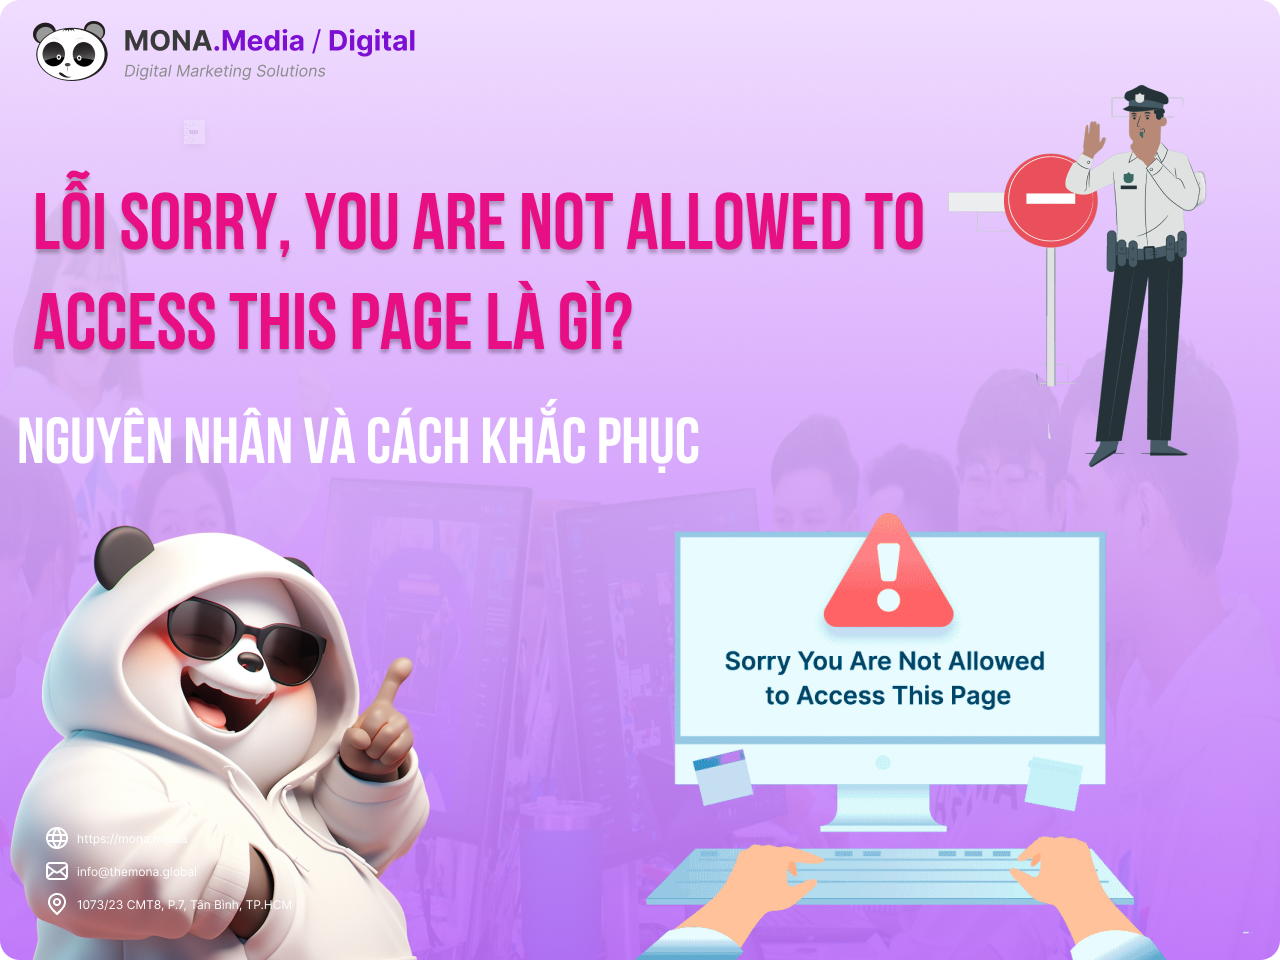 Lỗi sorry you are not allowed to access this page